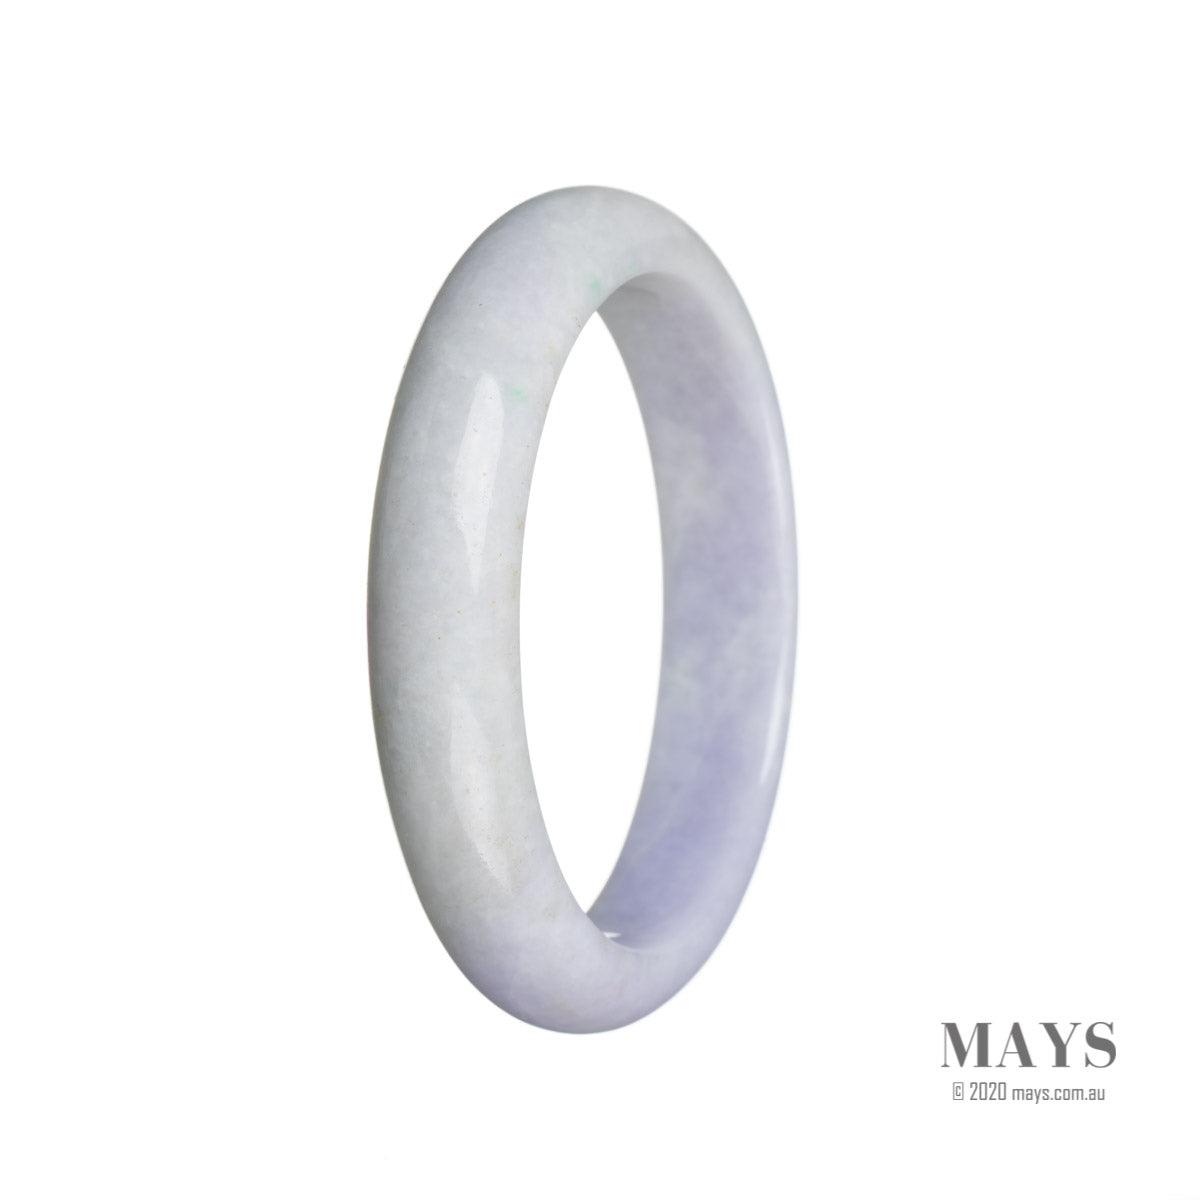 A close-up photo of a round bangle bracelet made of lavender jadeite, certified as Type A. The bracelet has a semi-round shape and measures 60mm in diameter. Created by MAYS GEMS, a trusted brand in gemstone jewelry.